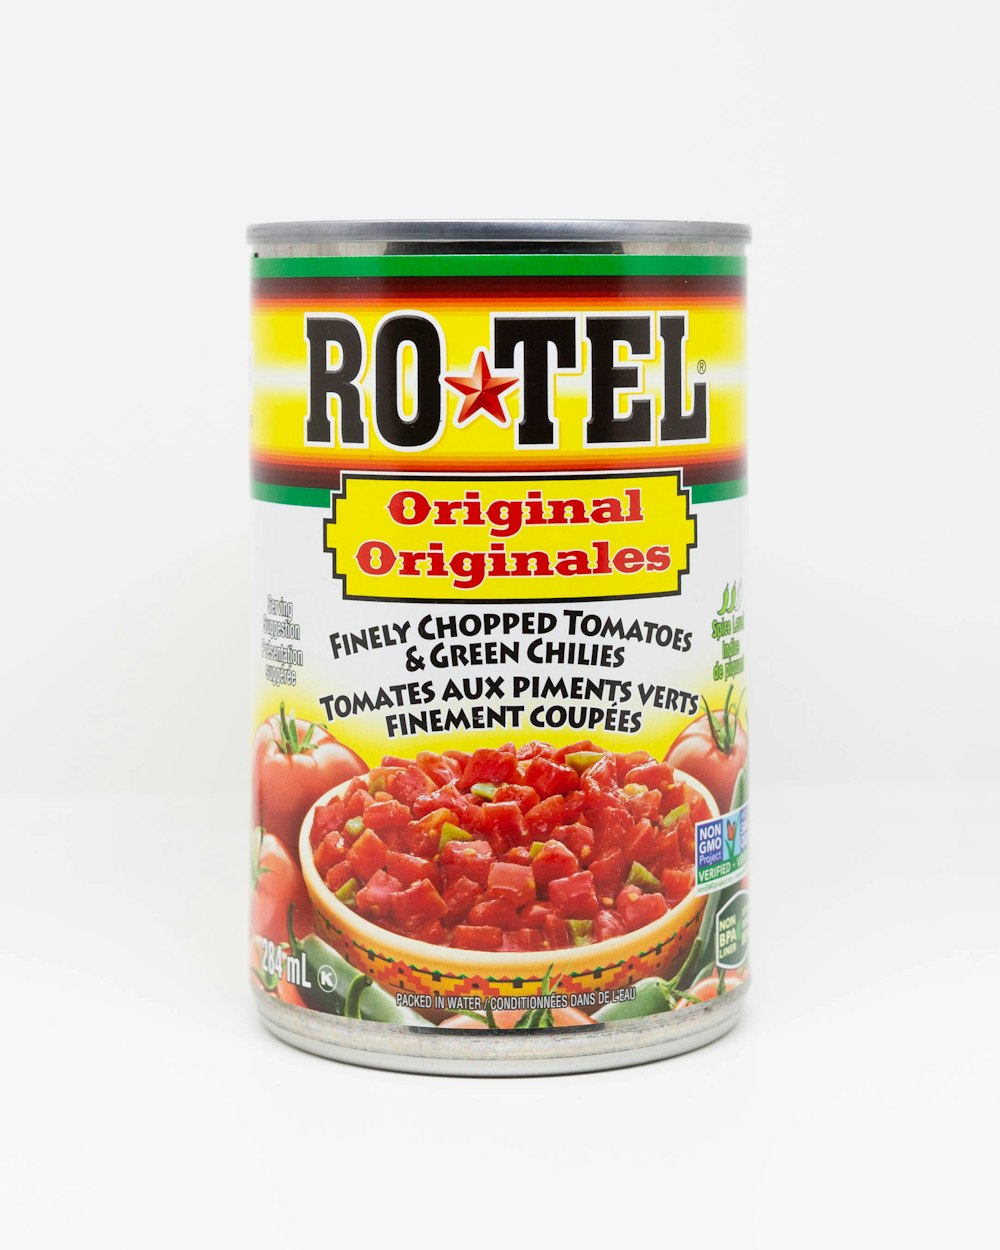 a can of tomato soup on a white background